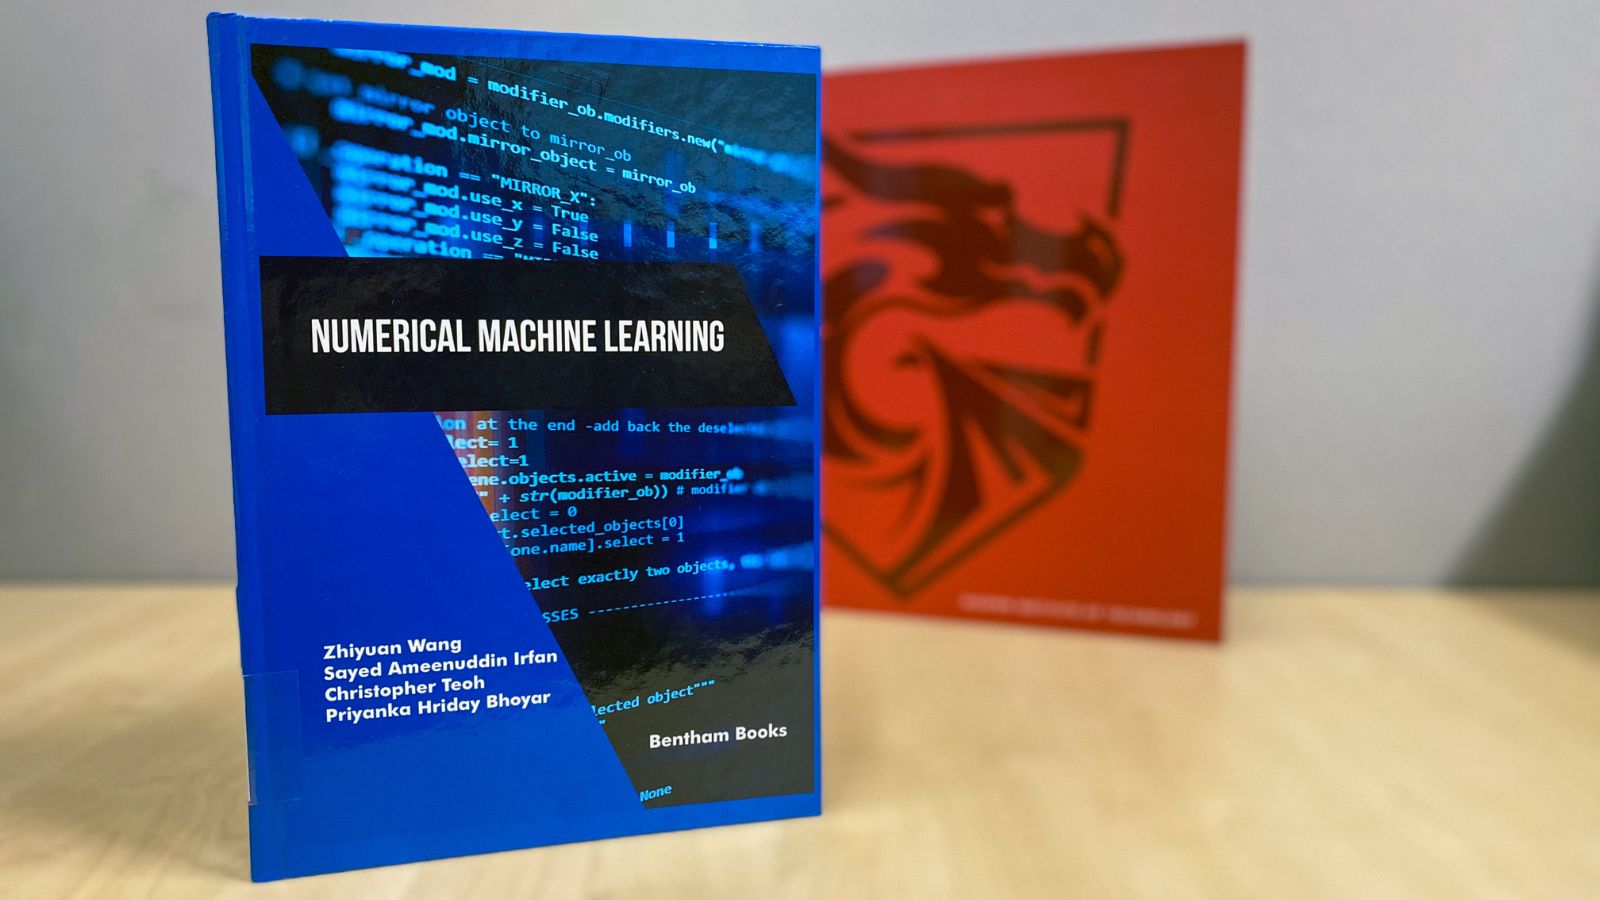 Numerical Machine Learning book stands on a table.